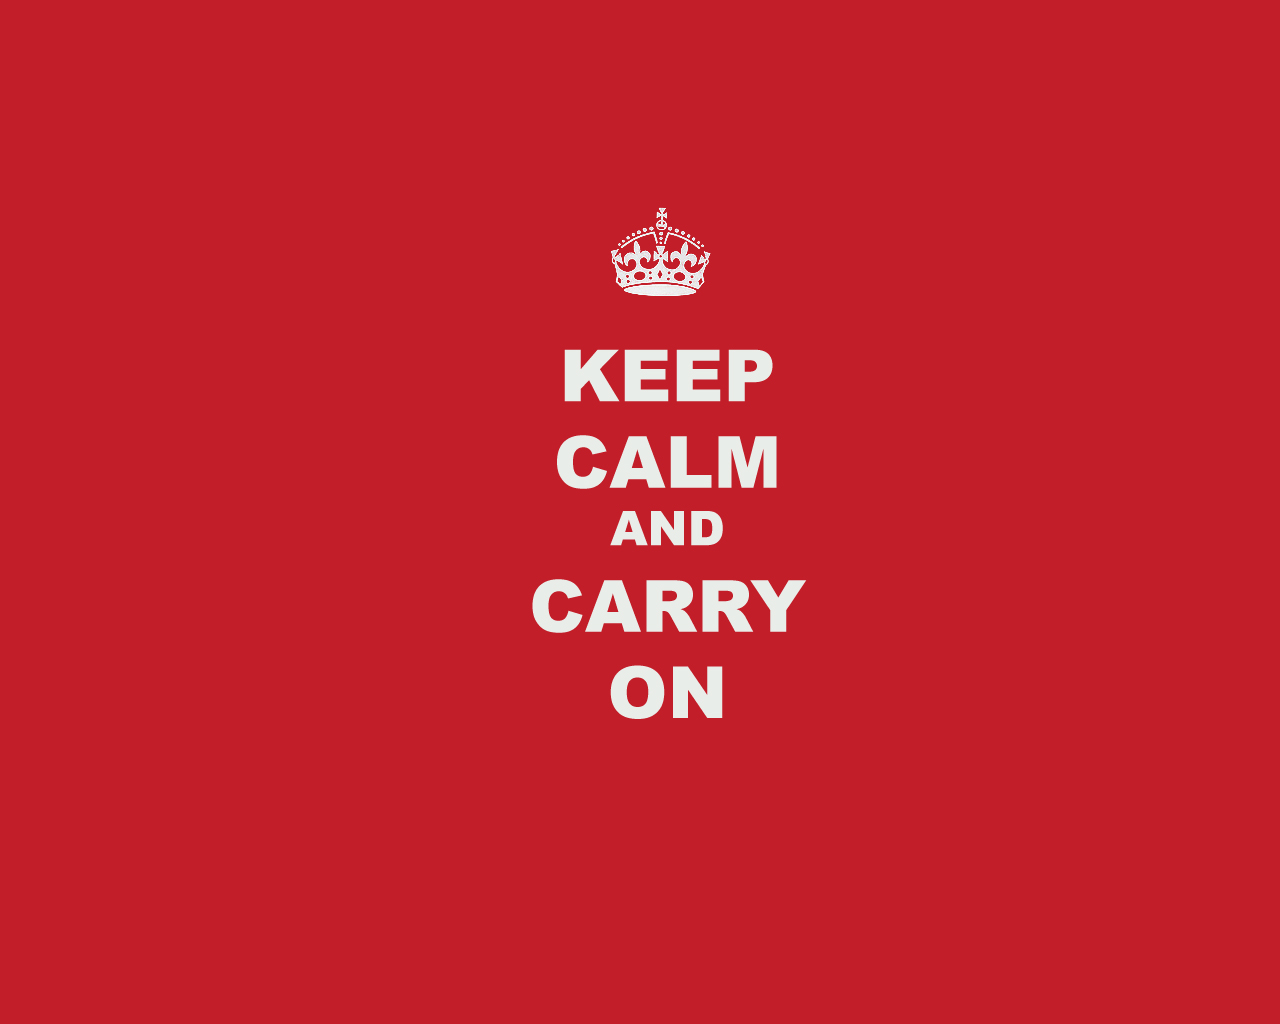 keep calm and carry on milkman